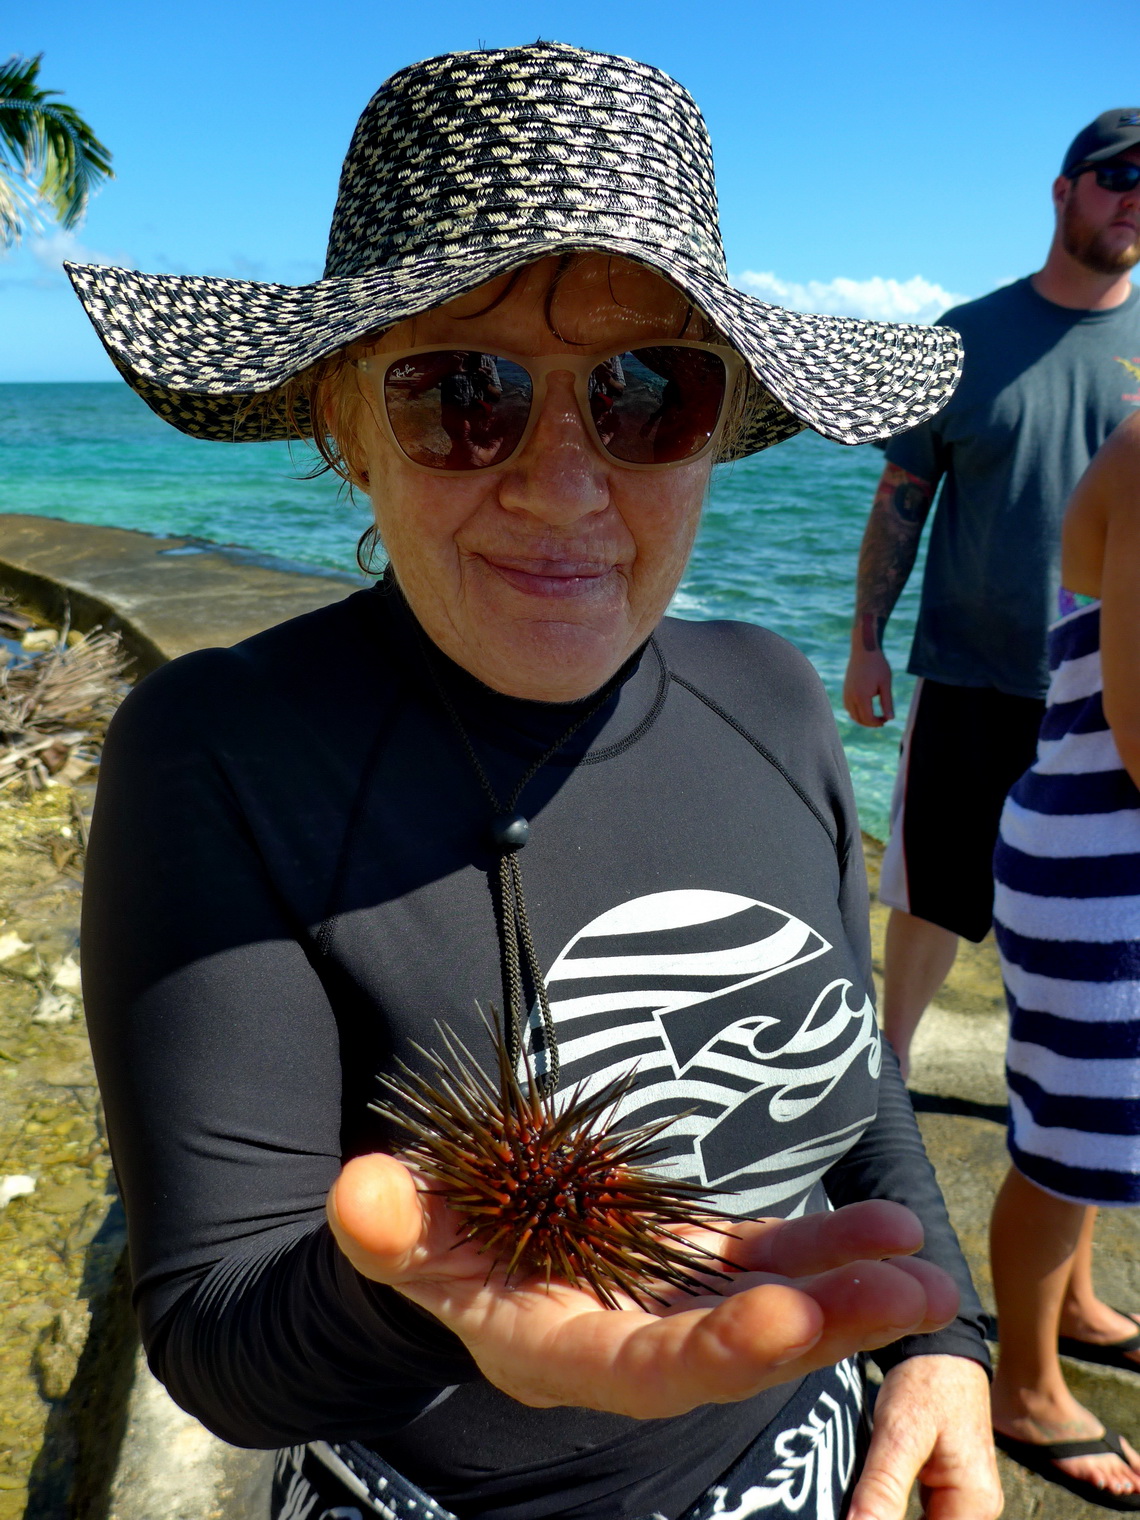 Marion with a sea urchin